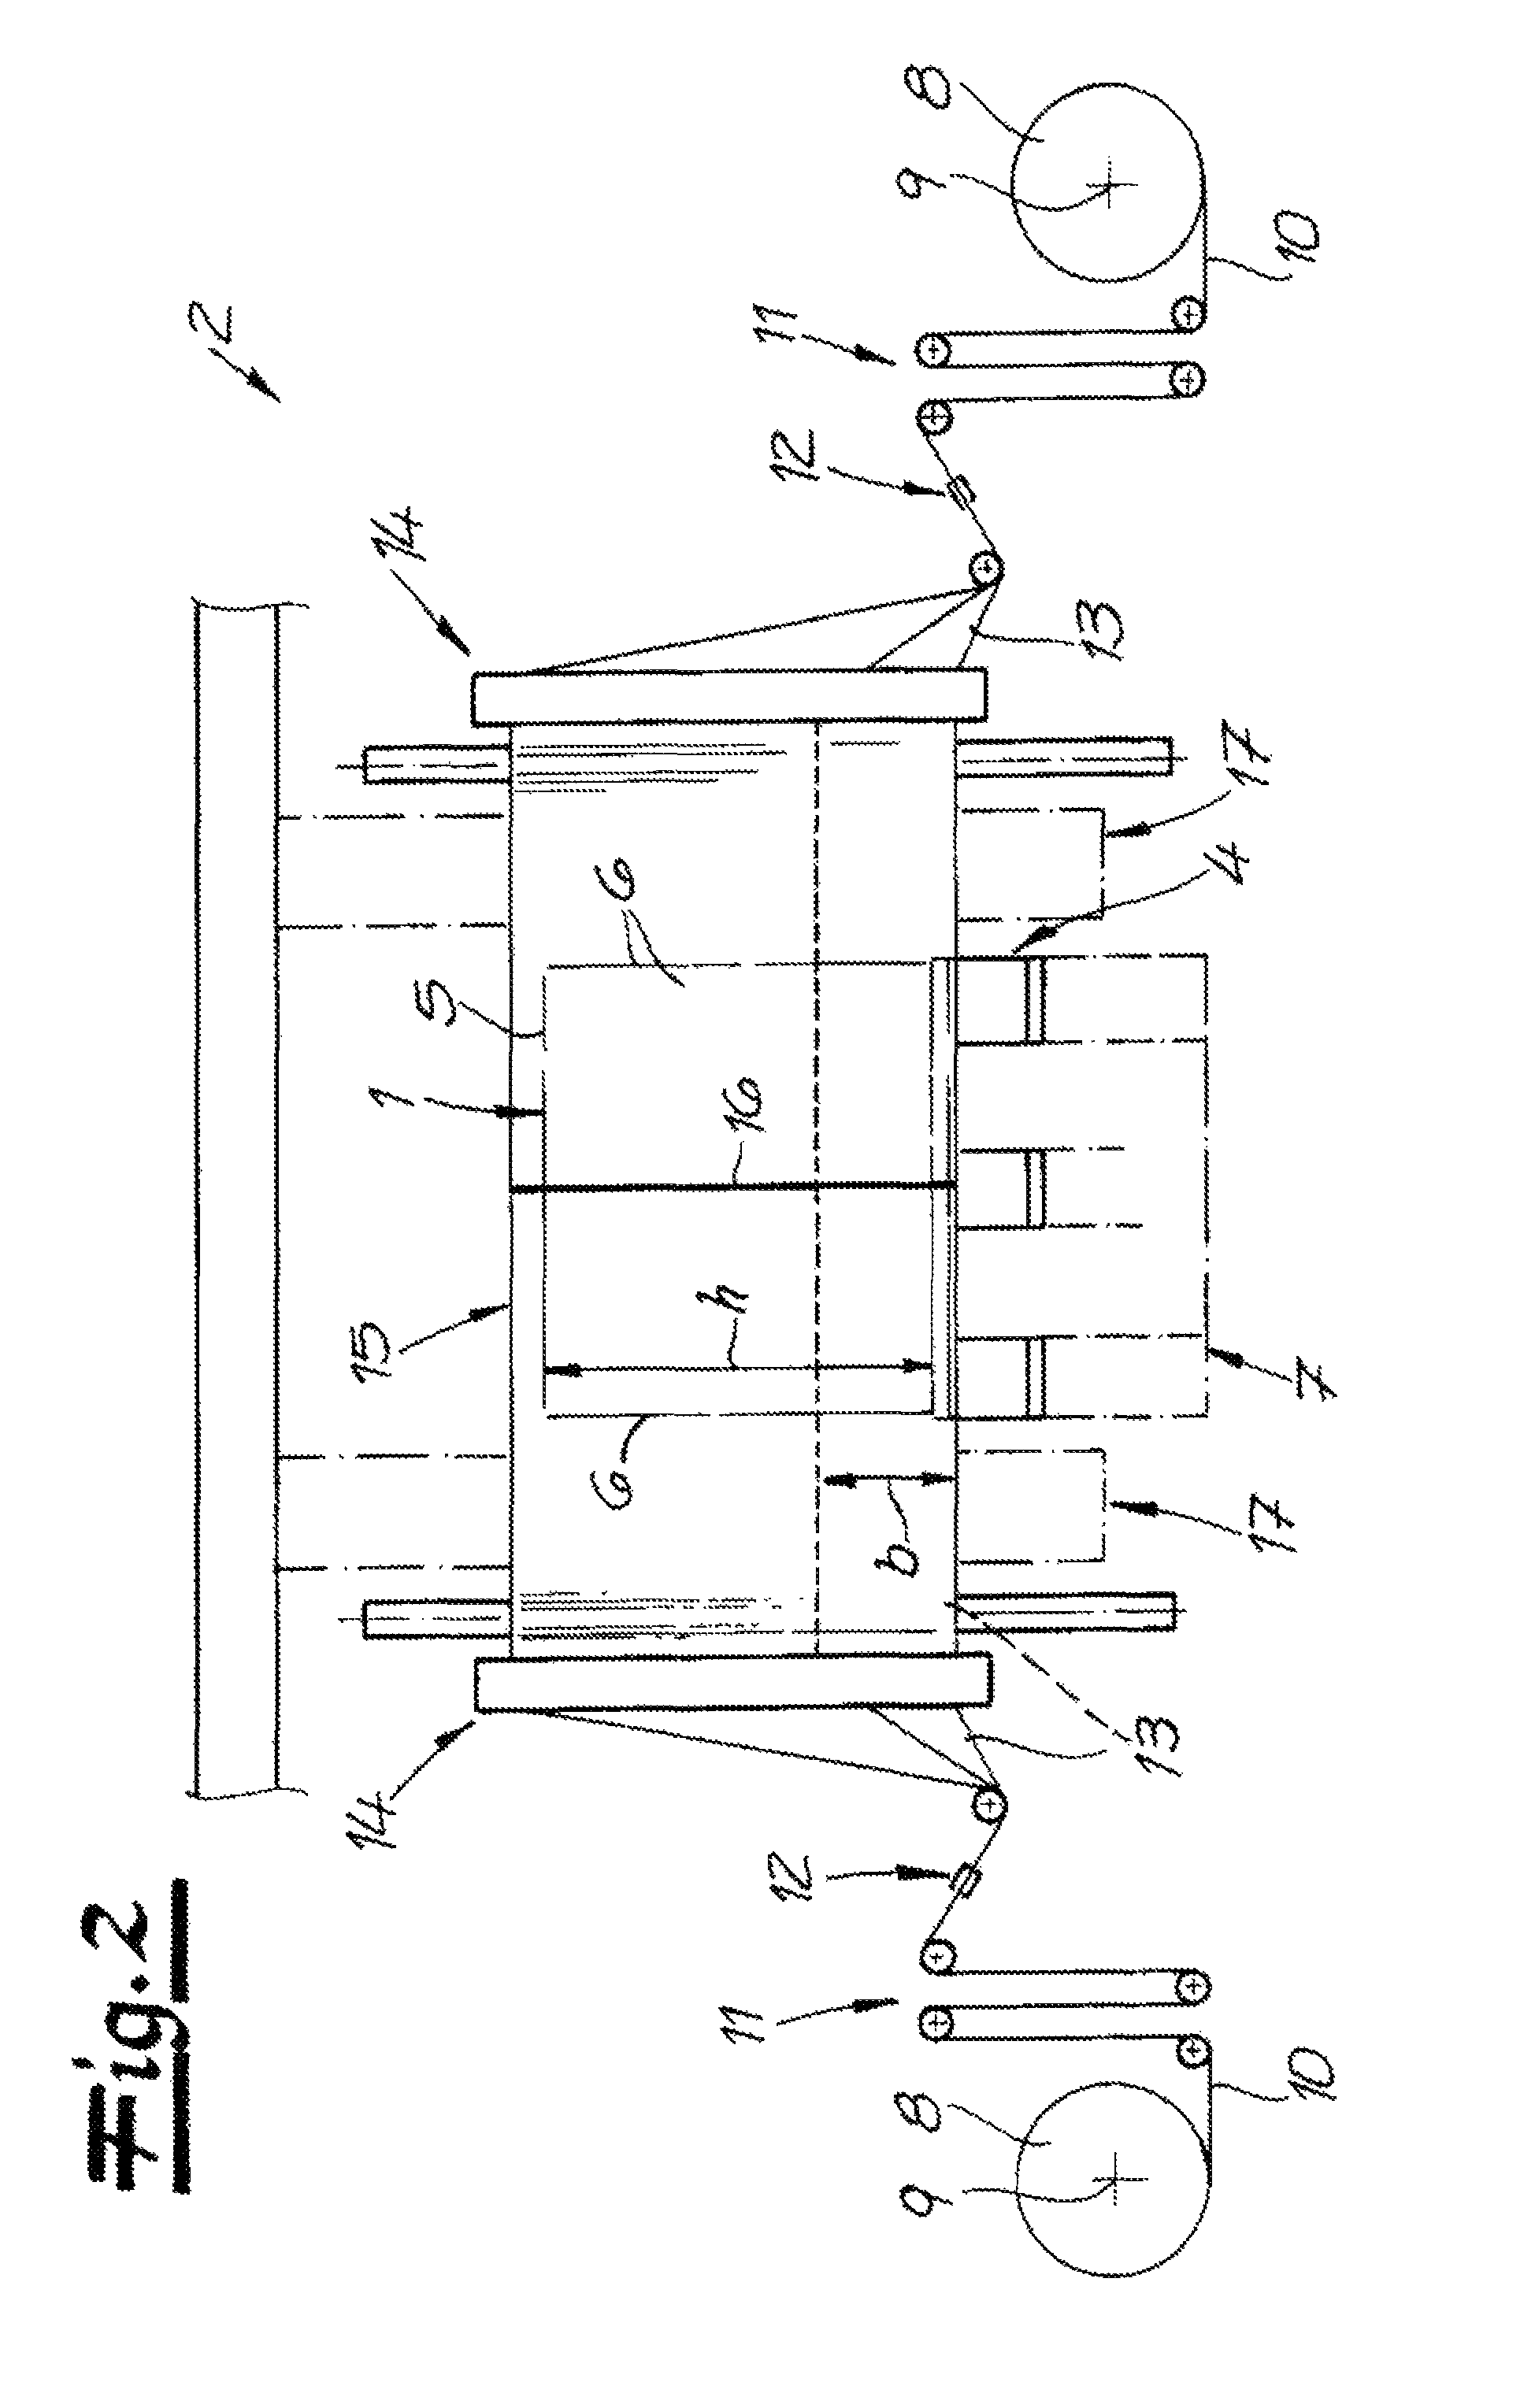 Apparatus for packaging an object in film